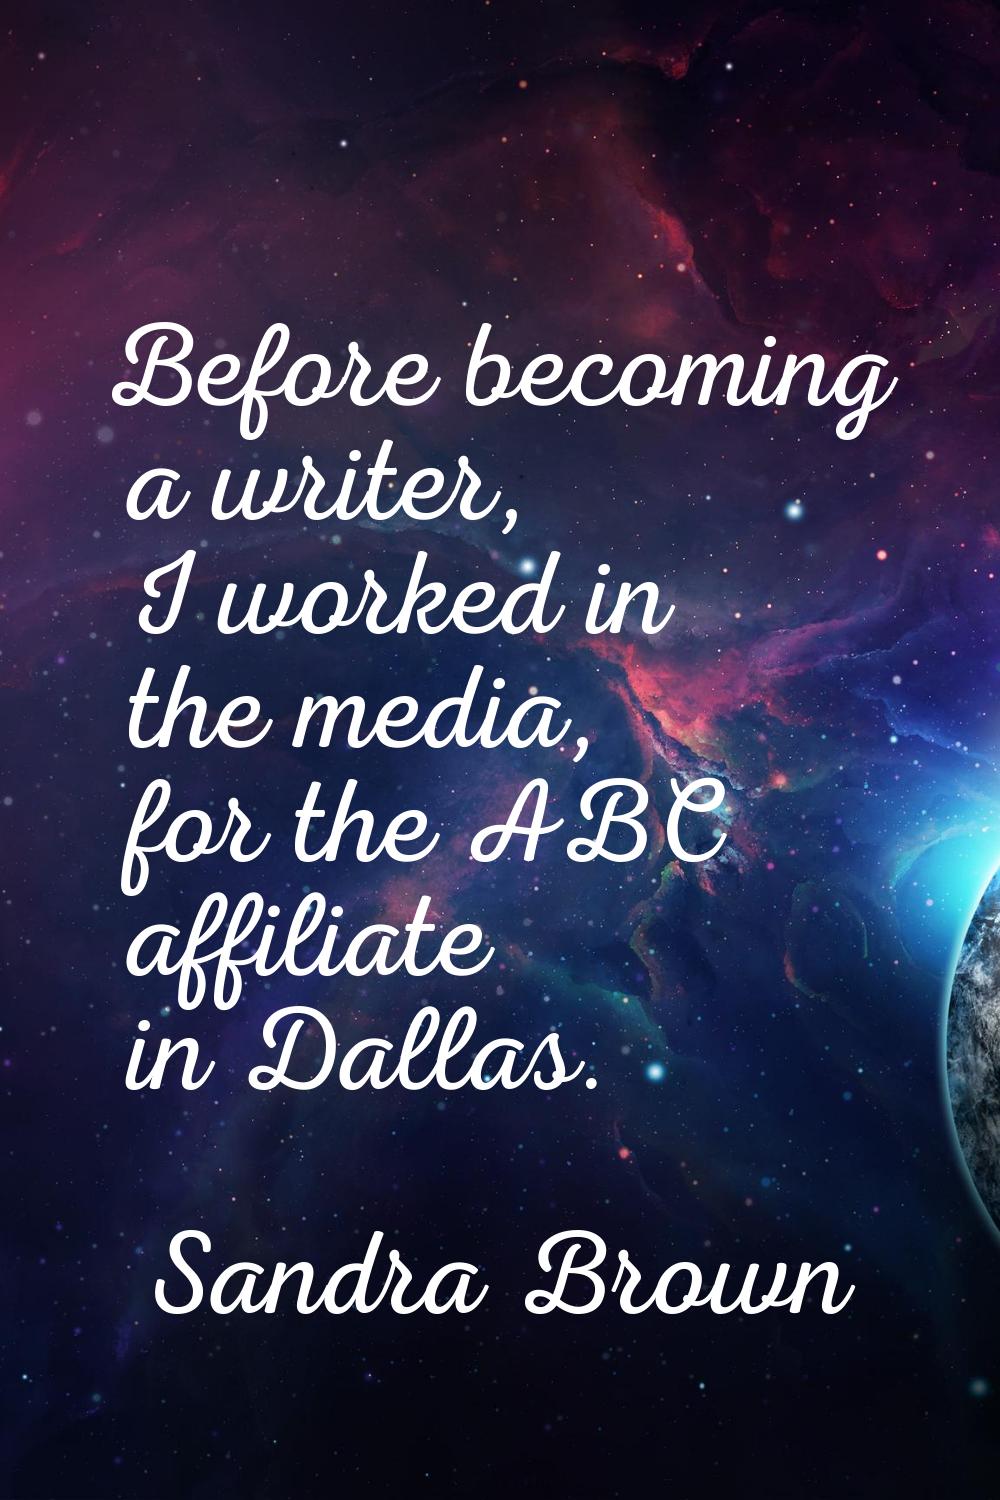 Before becoming a writer, I worked in the media, for the ABC affiliate in Dallas.